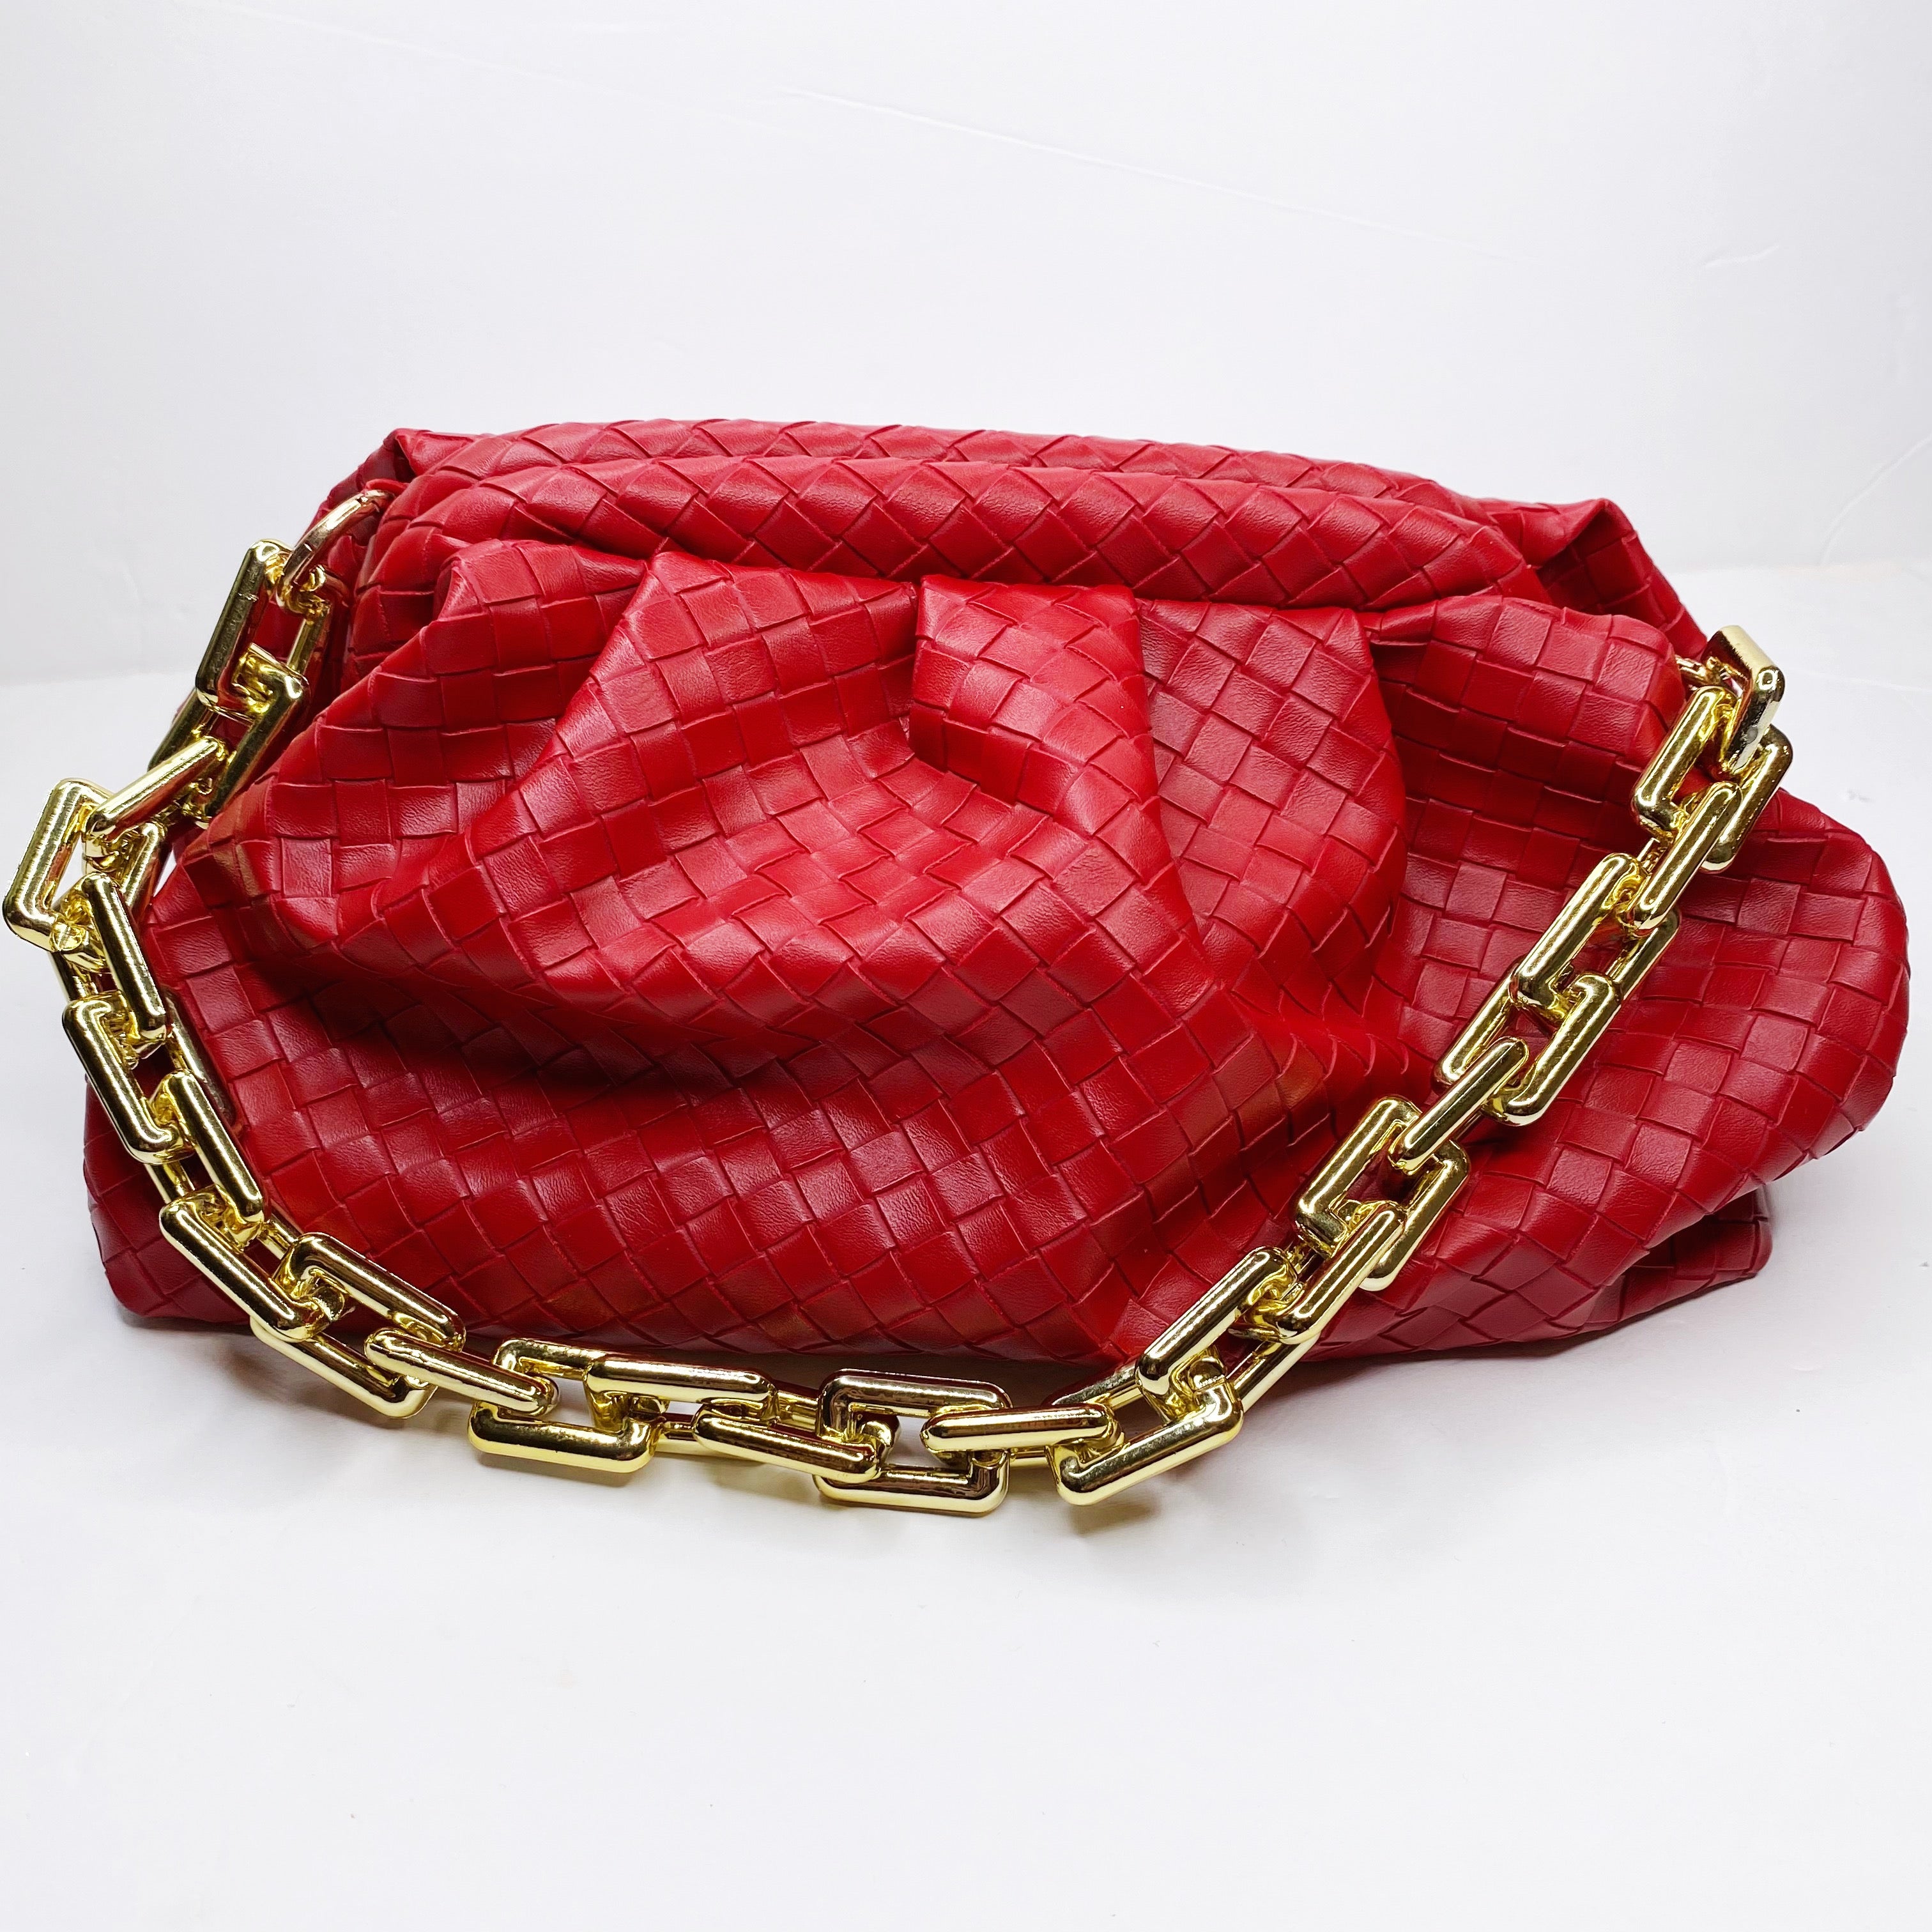 Felicia Weave Red Leather Pouch Handbag